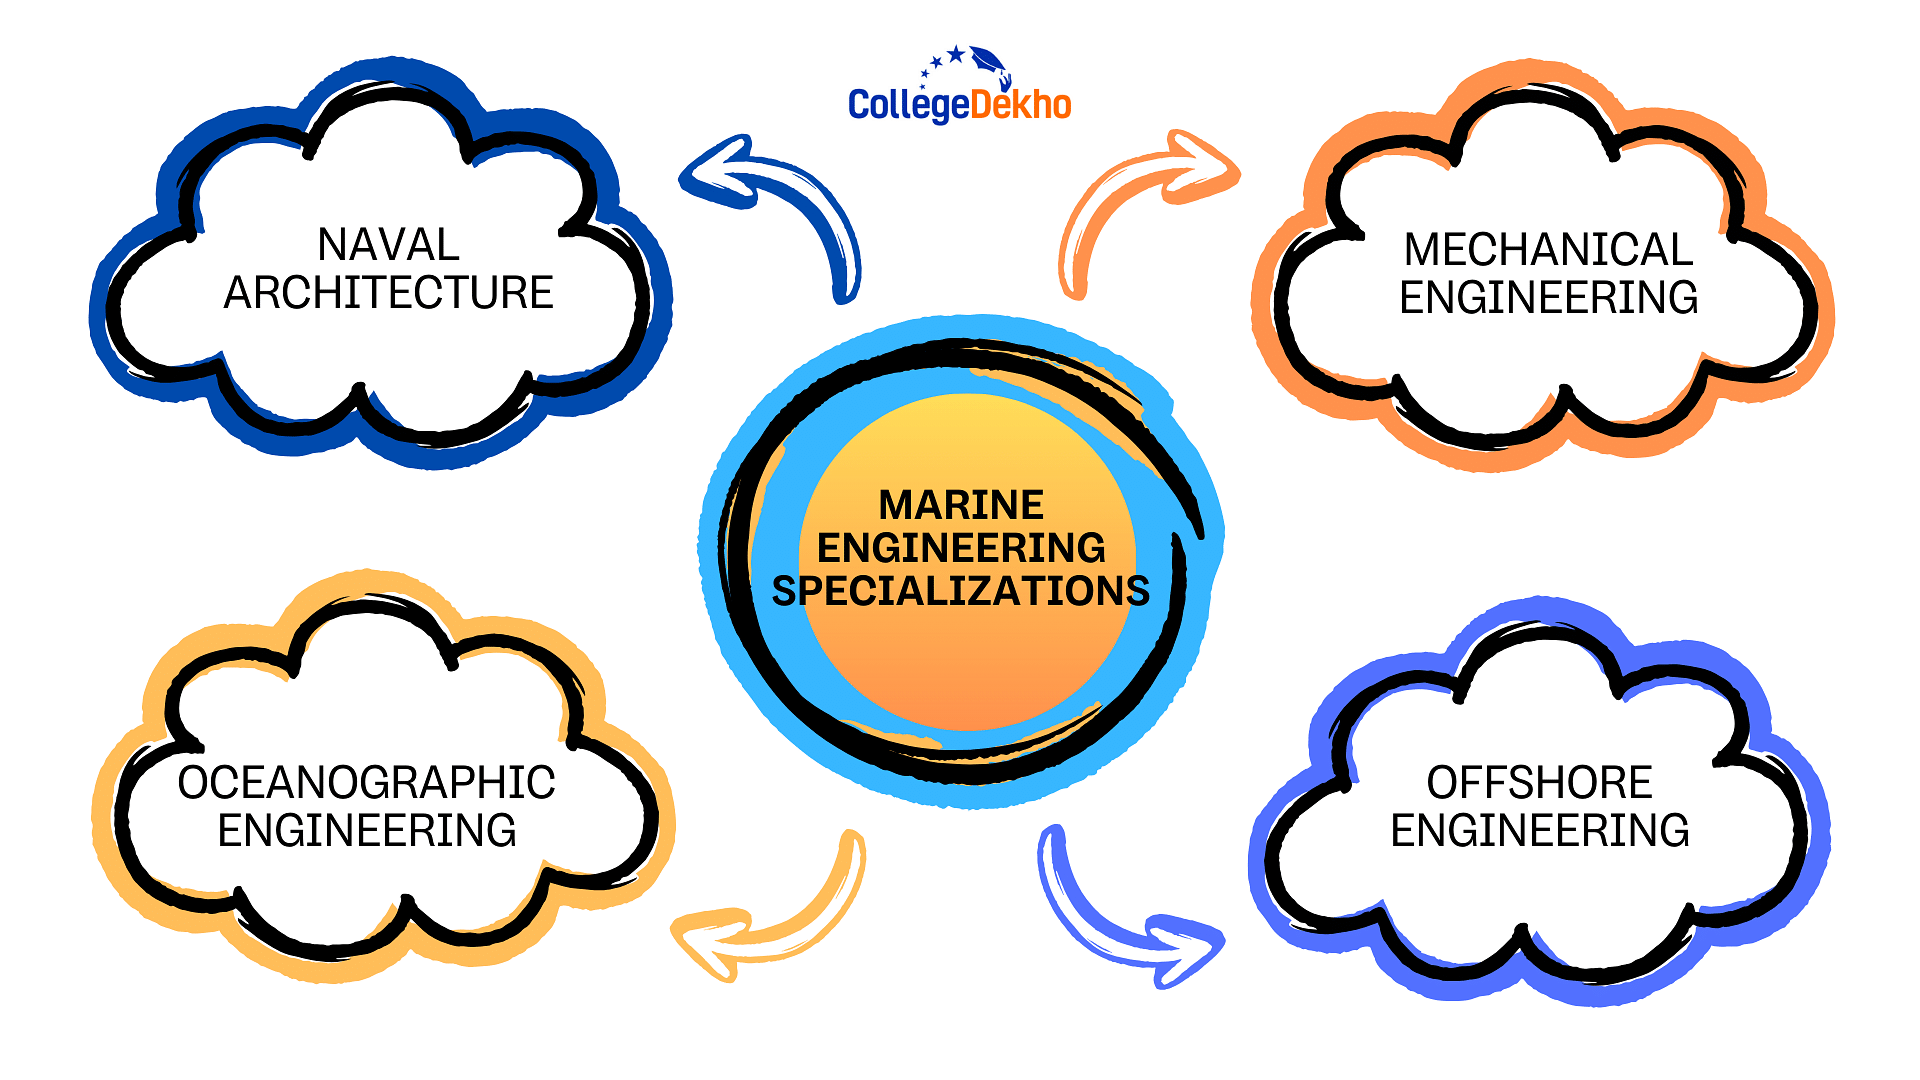 Specializations Offered in Marine Engineering